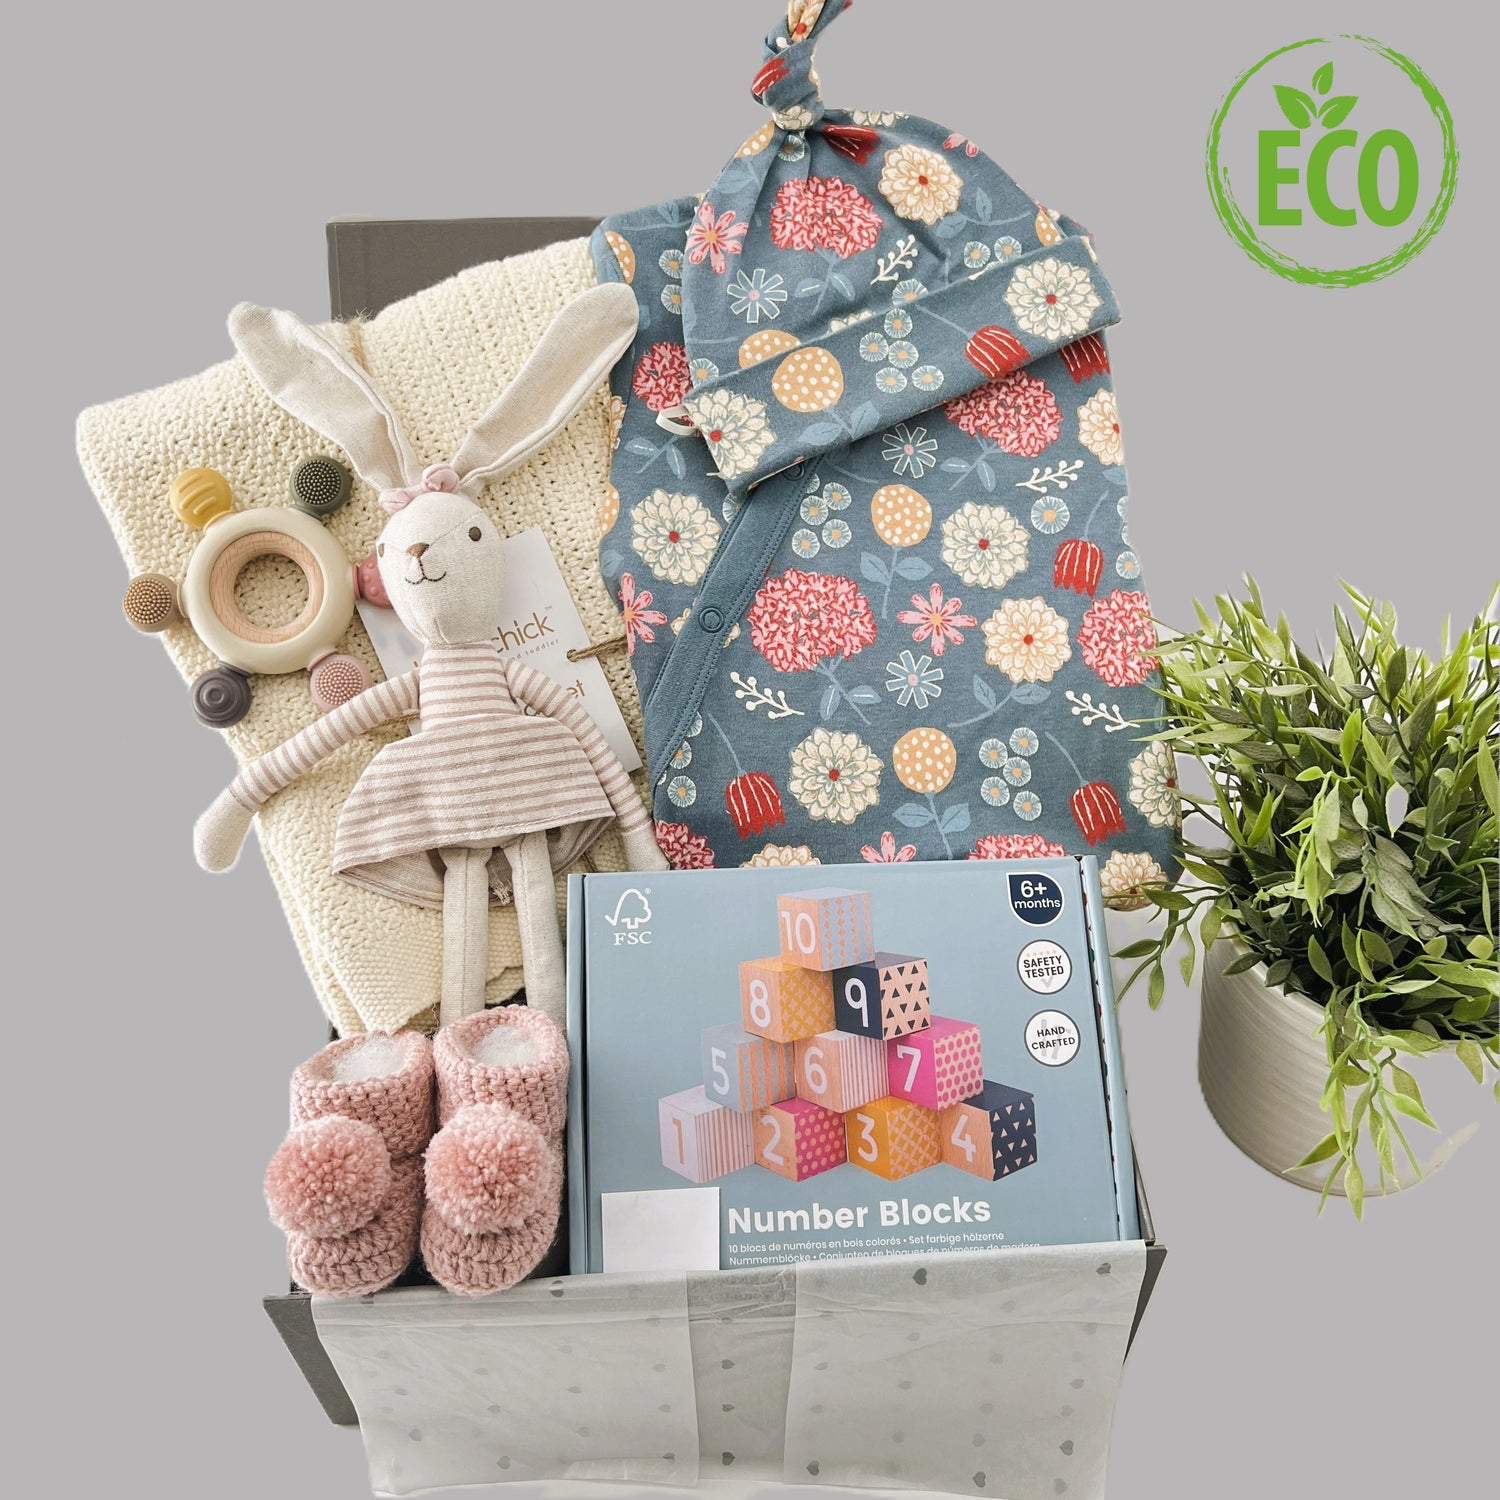 The eco friendly contents of this new baby girl gift are 1 x almond cotton cellular baby blanket, 1 x GOTS certified baby romper in blue cream and pink floral pateern with matching baby knot hat, a linen hare soft baby toy, a silicone teether a pair of baby booties in pink and a set of FSW wooden baby blocks.